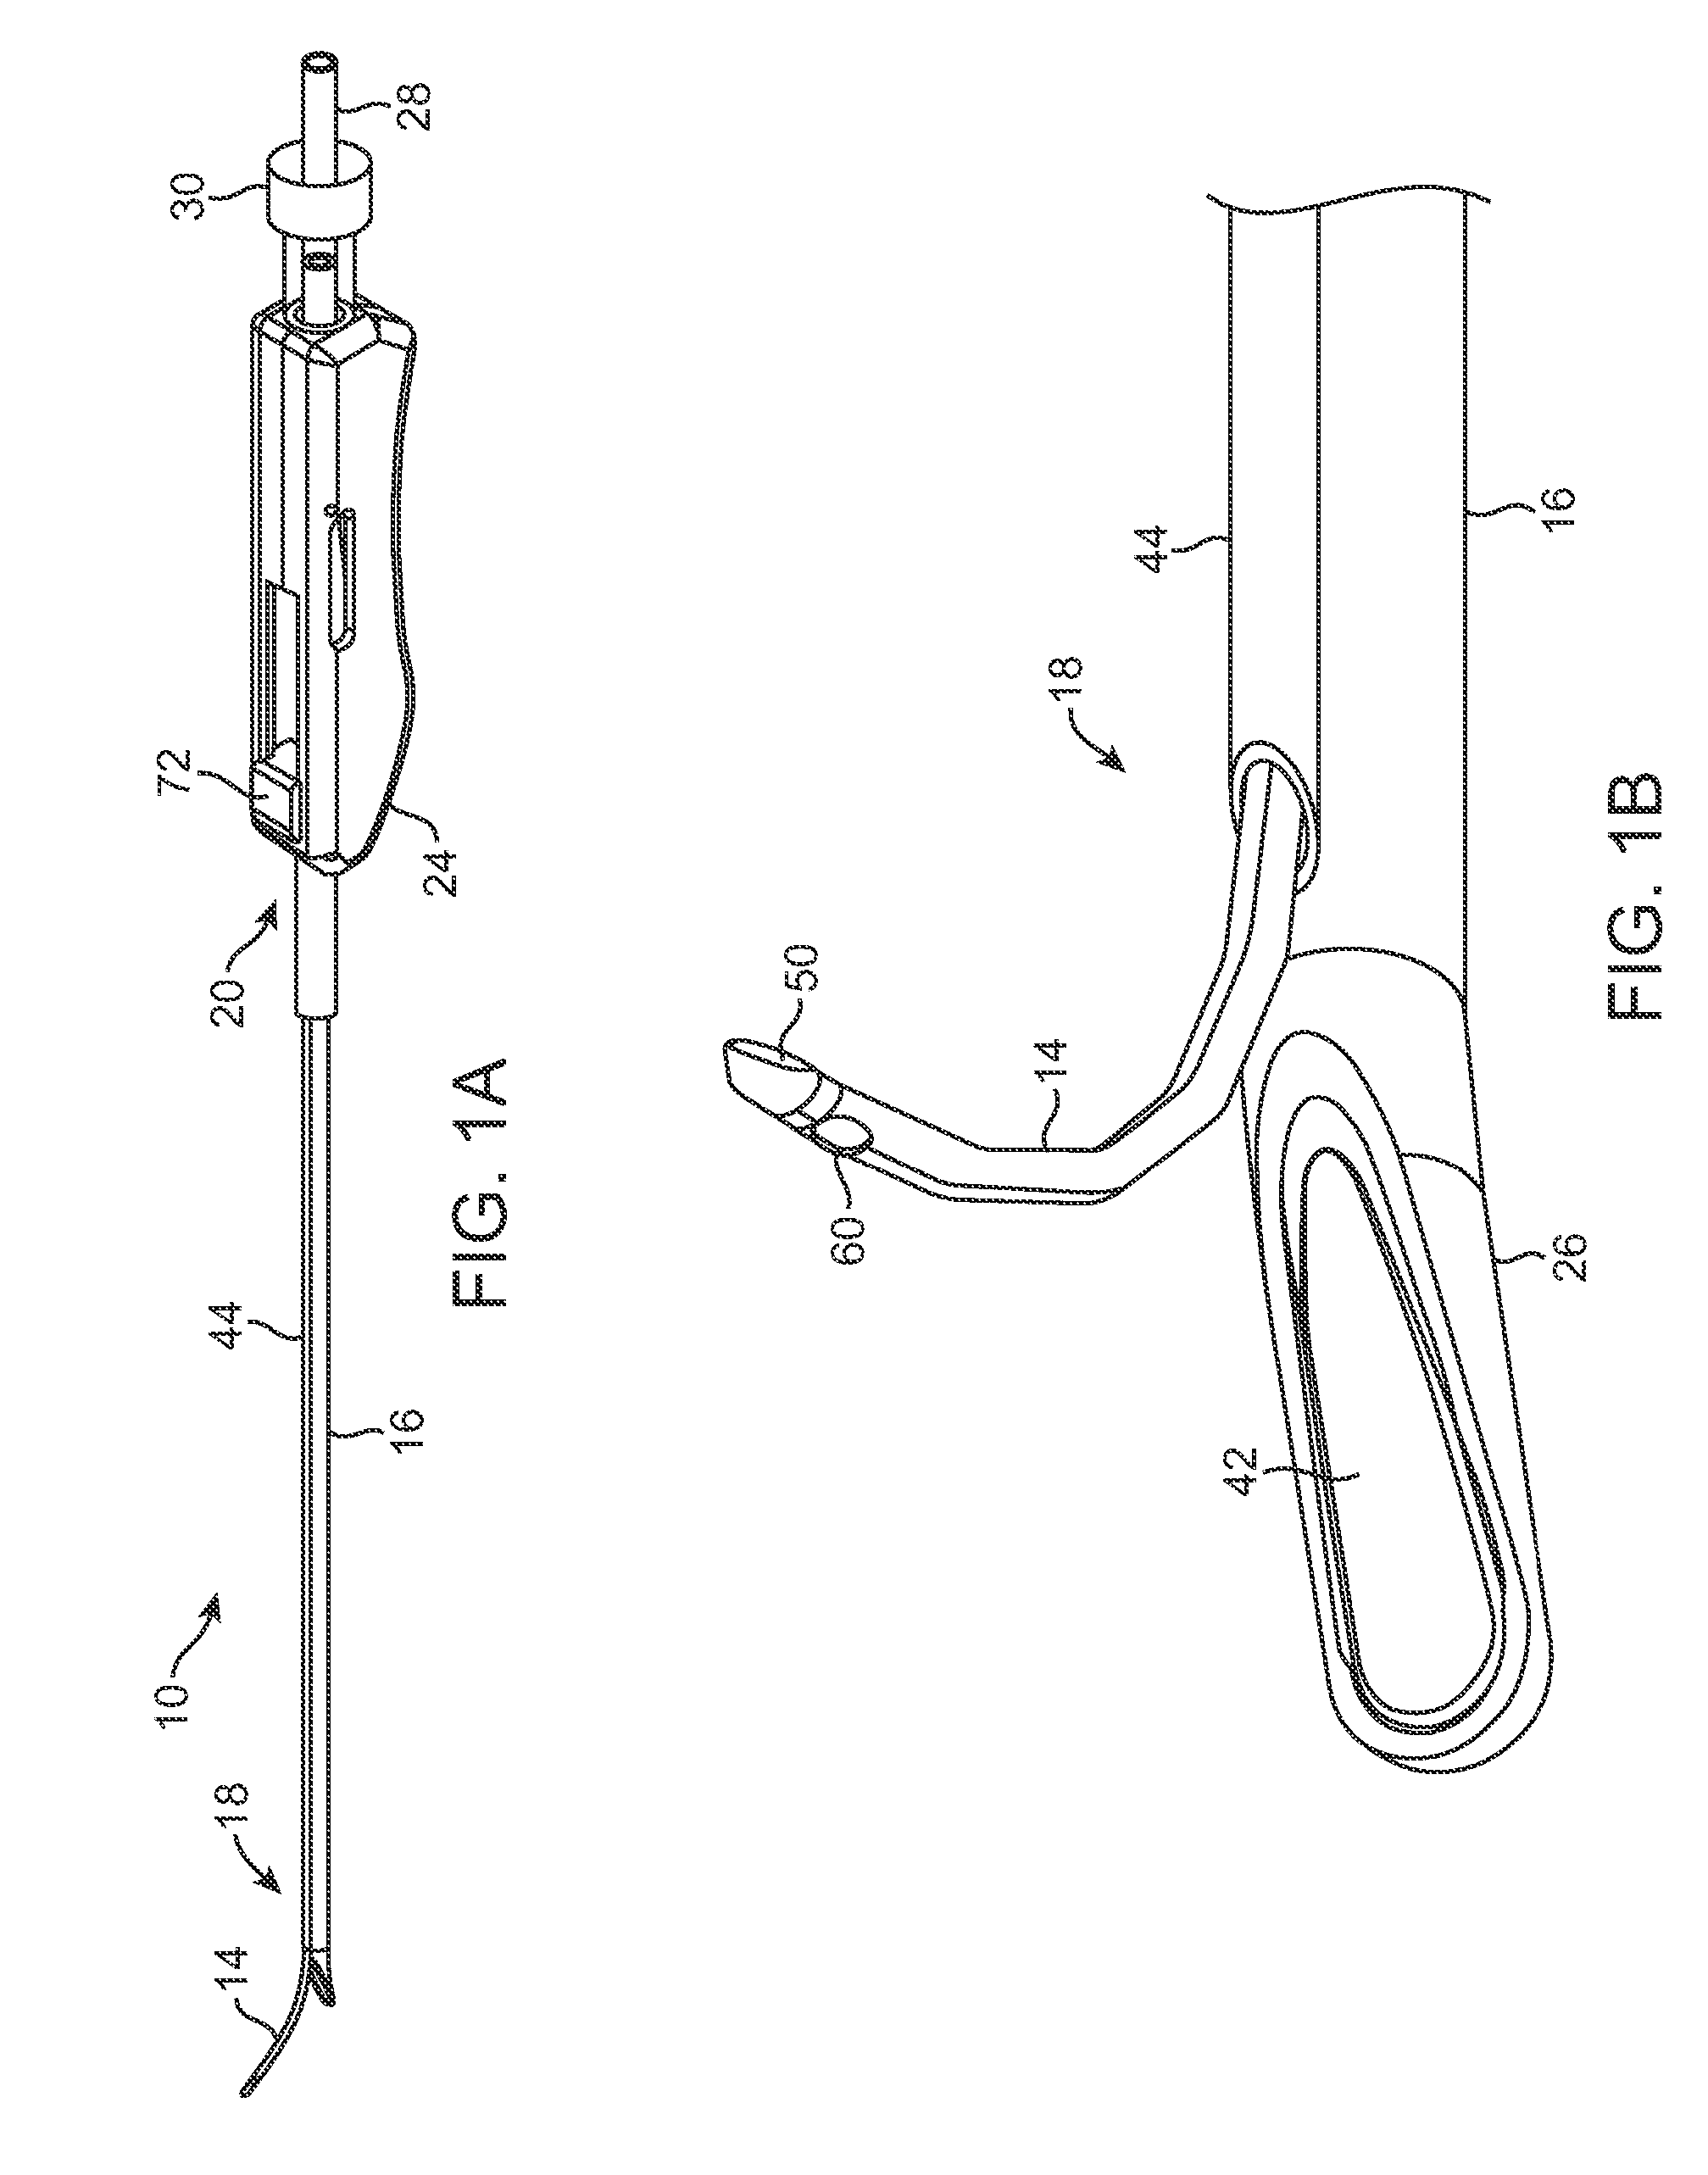 Rigid delivery systems having inclined ultrasound and curved needle